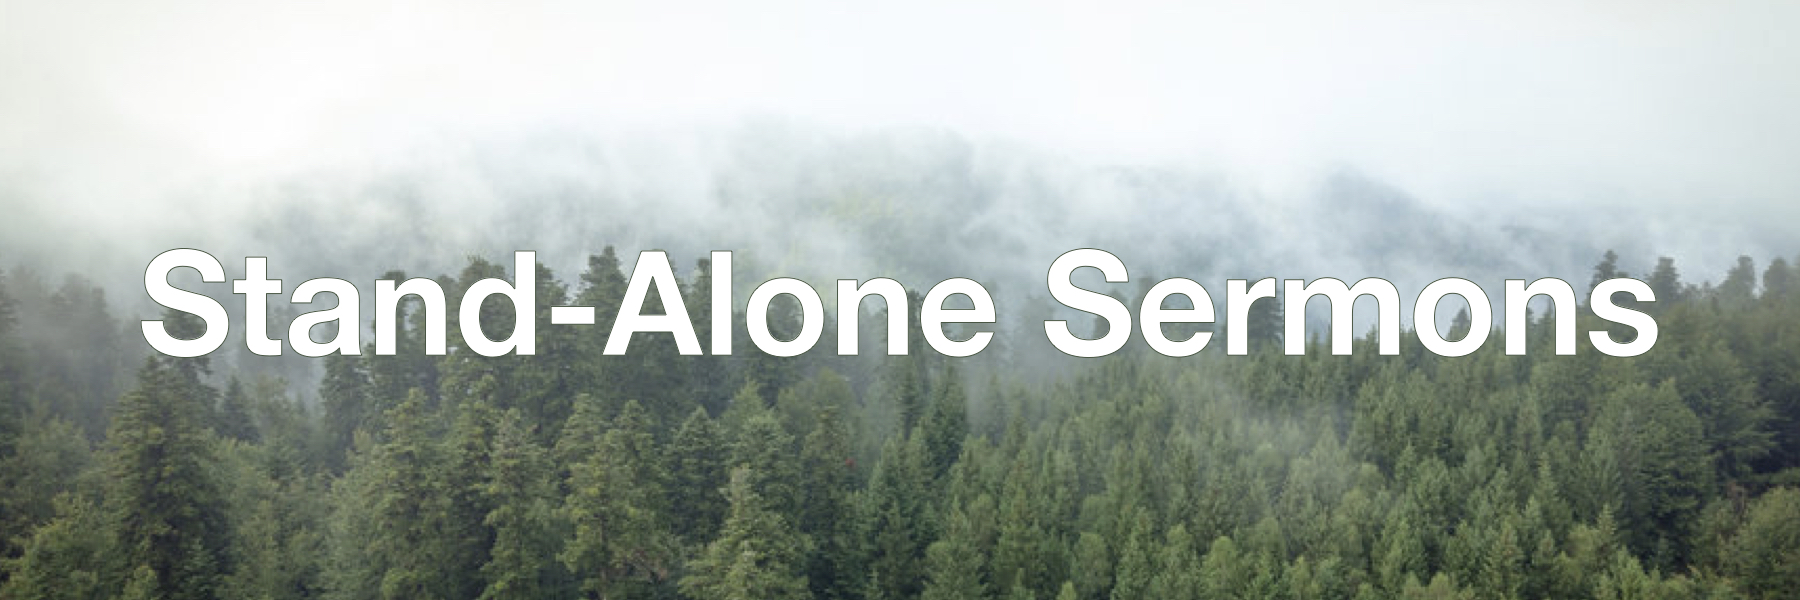 Stand Alone Sermons Page Banner.001